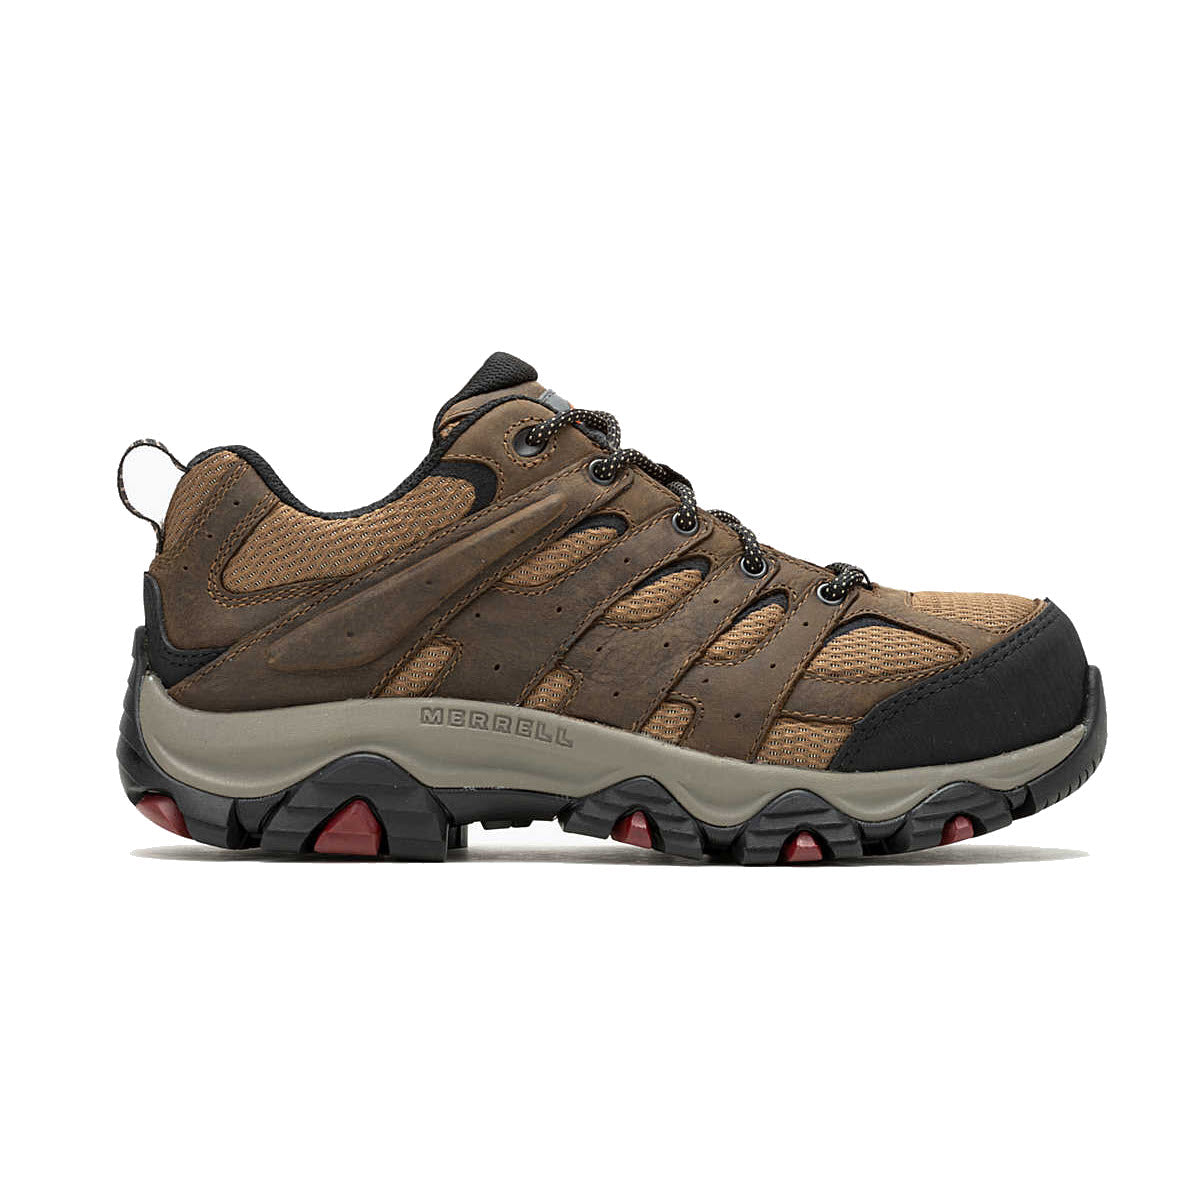 A pair of Merrell Moab Vertex 2 Low Carbon Fiber Waterproof Leather brown hiking shoes with visible branding and heat-resistant outsole.